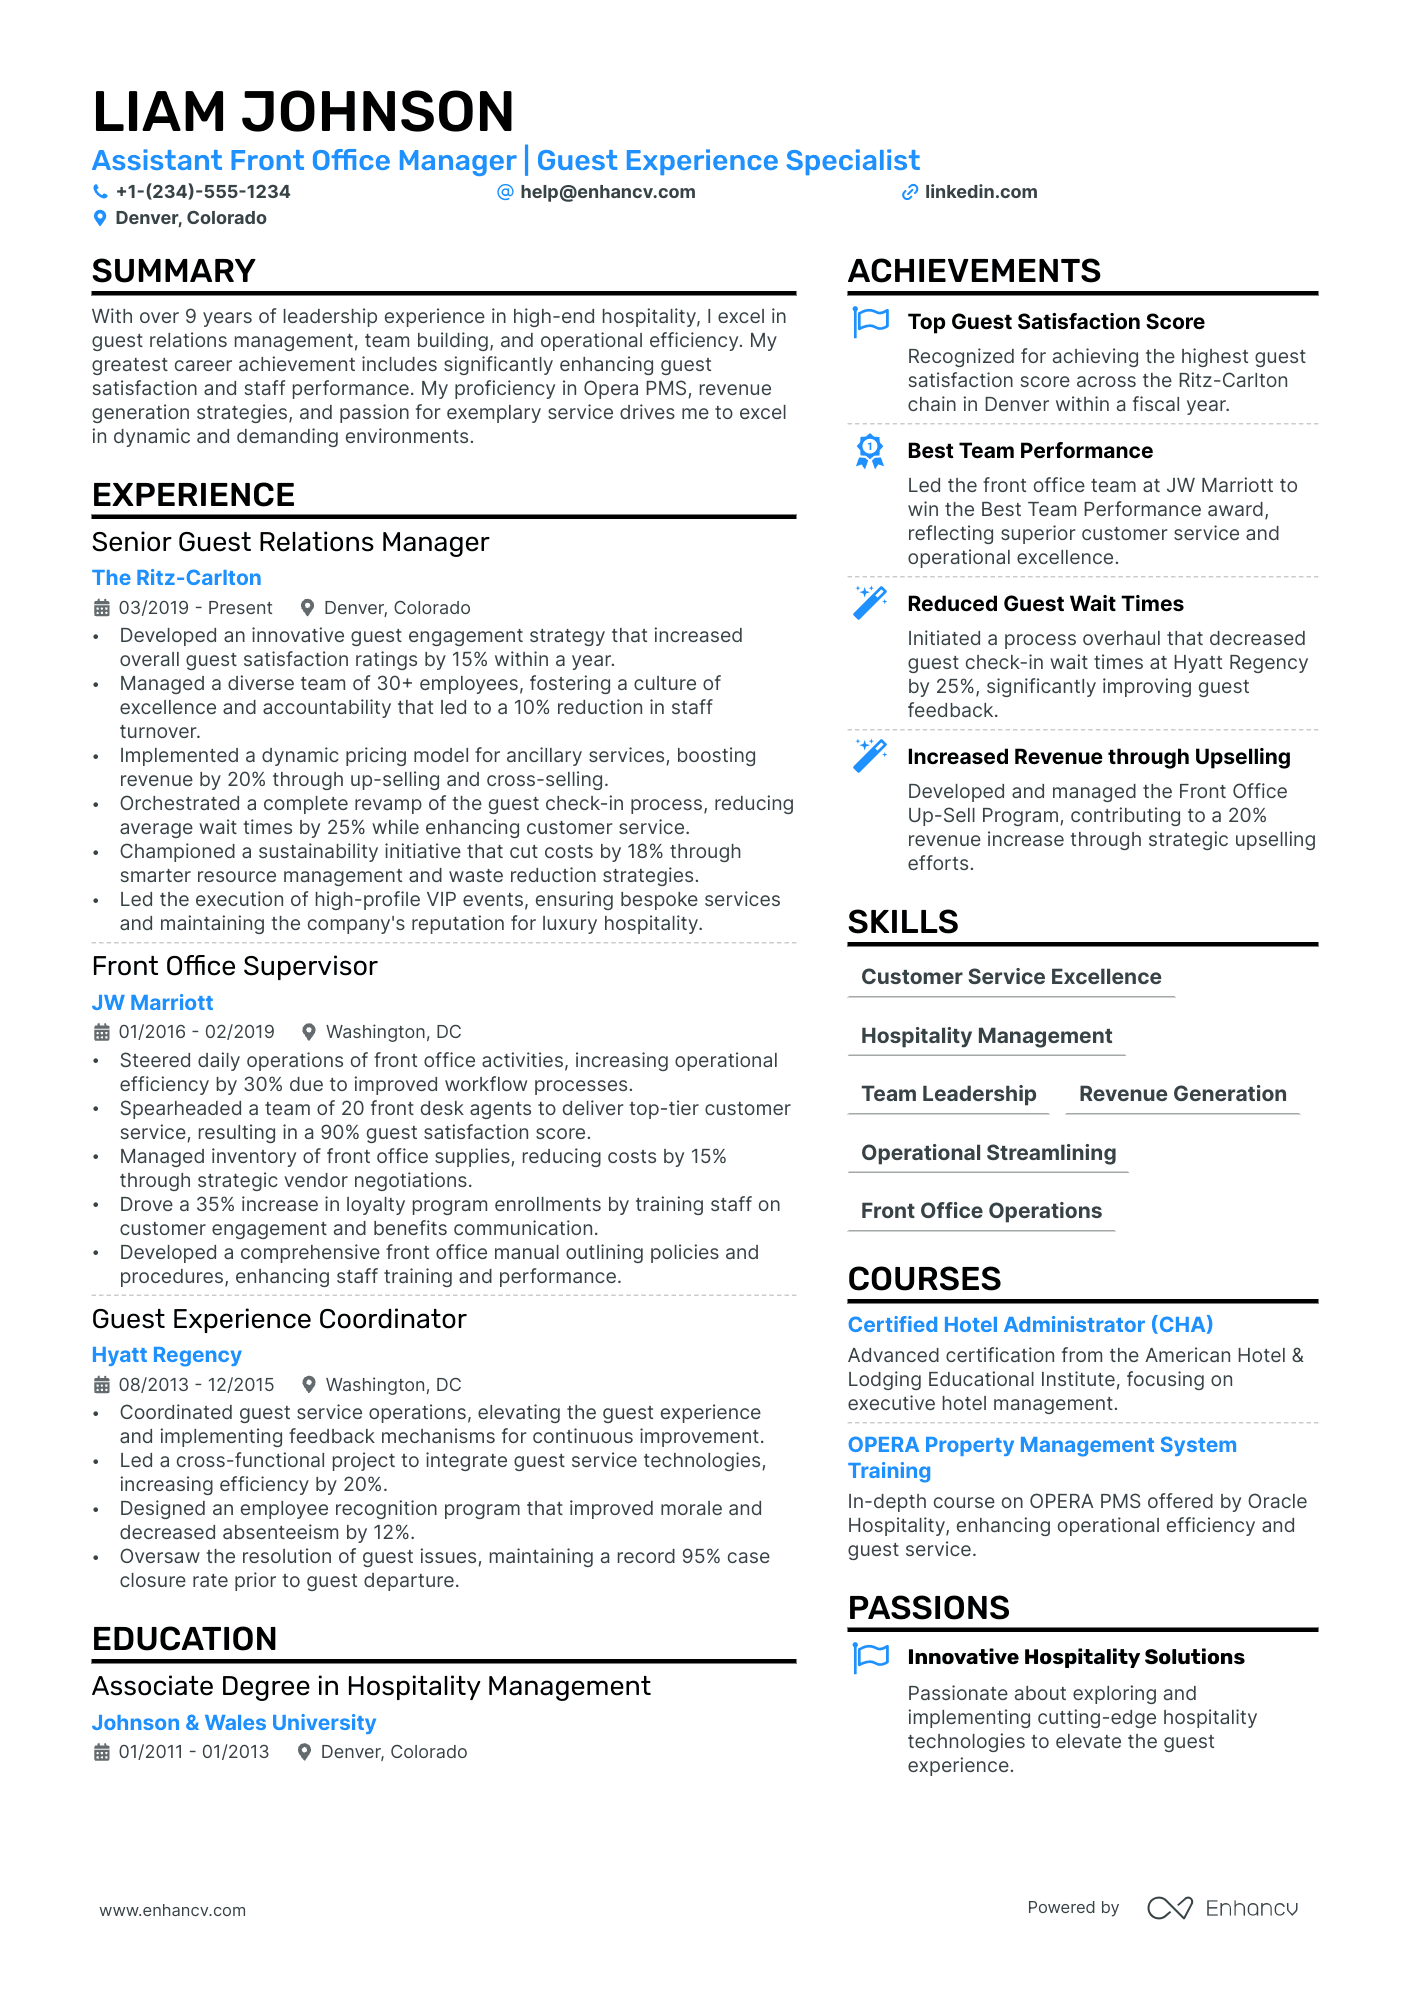 example of office manager resume